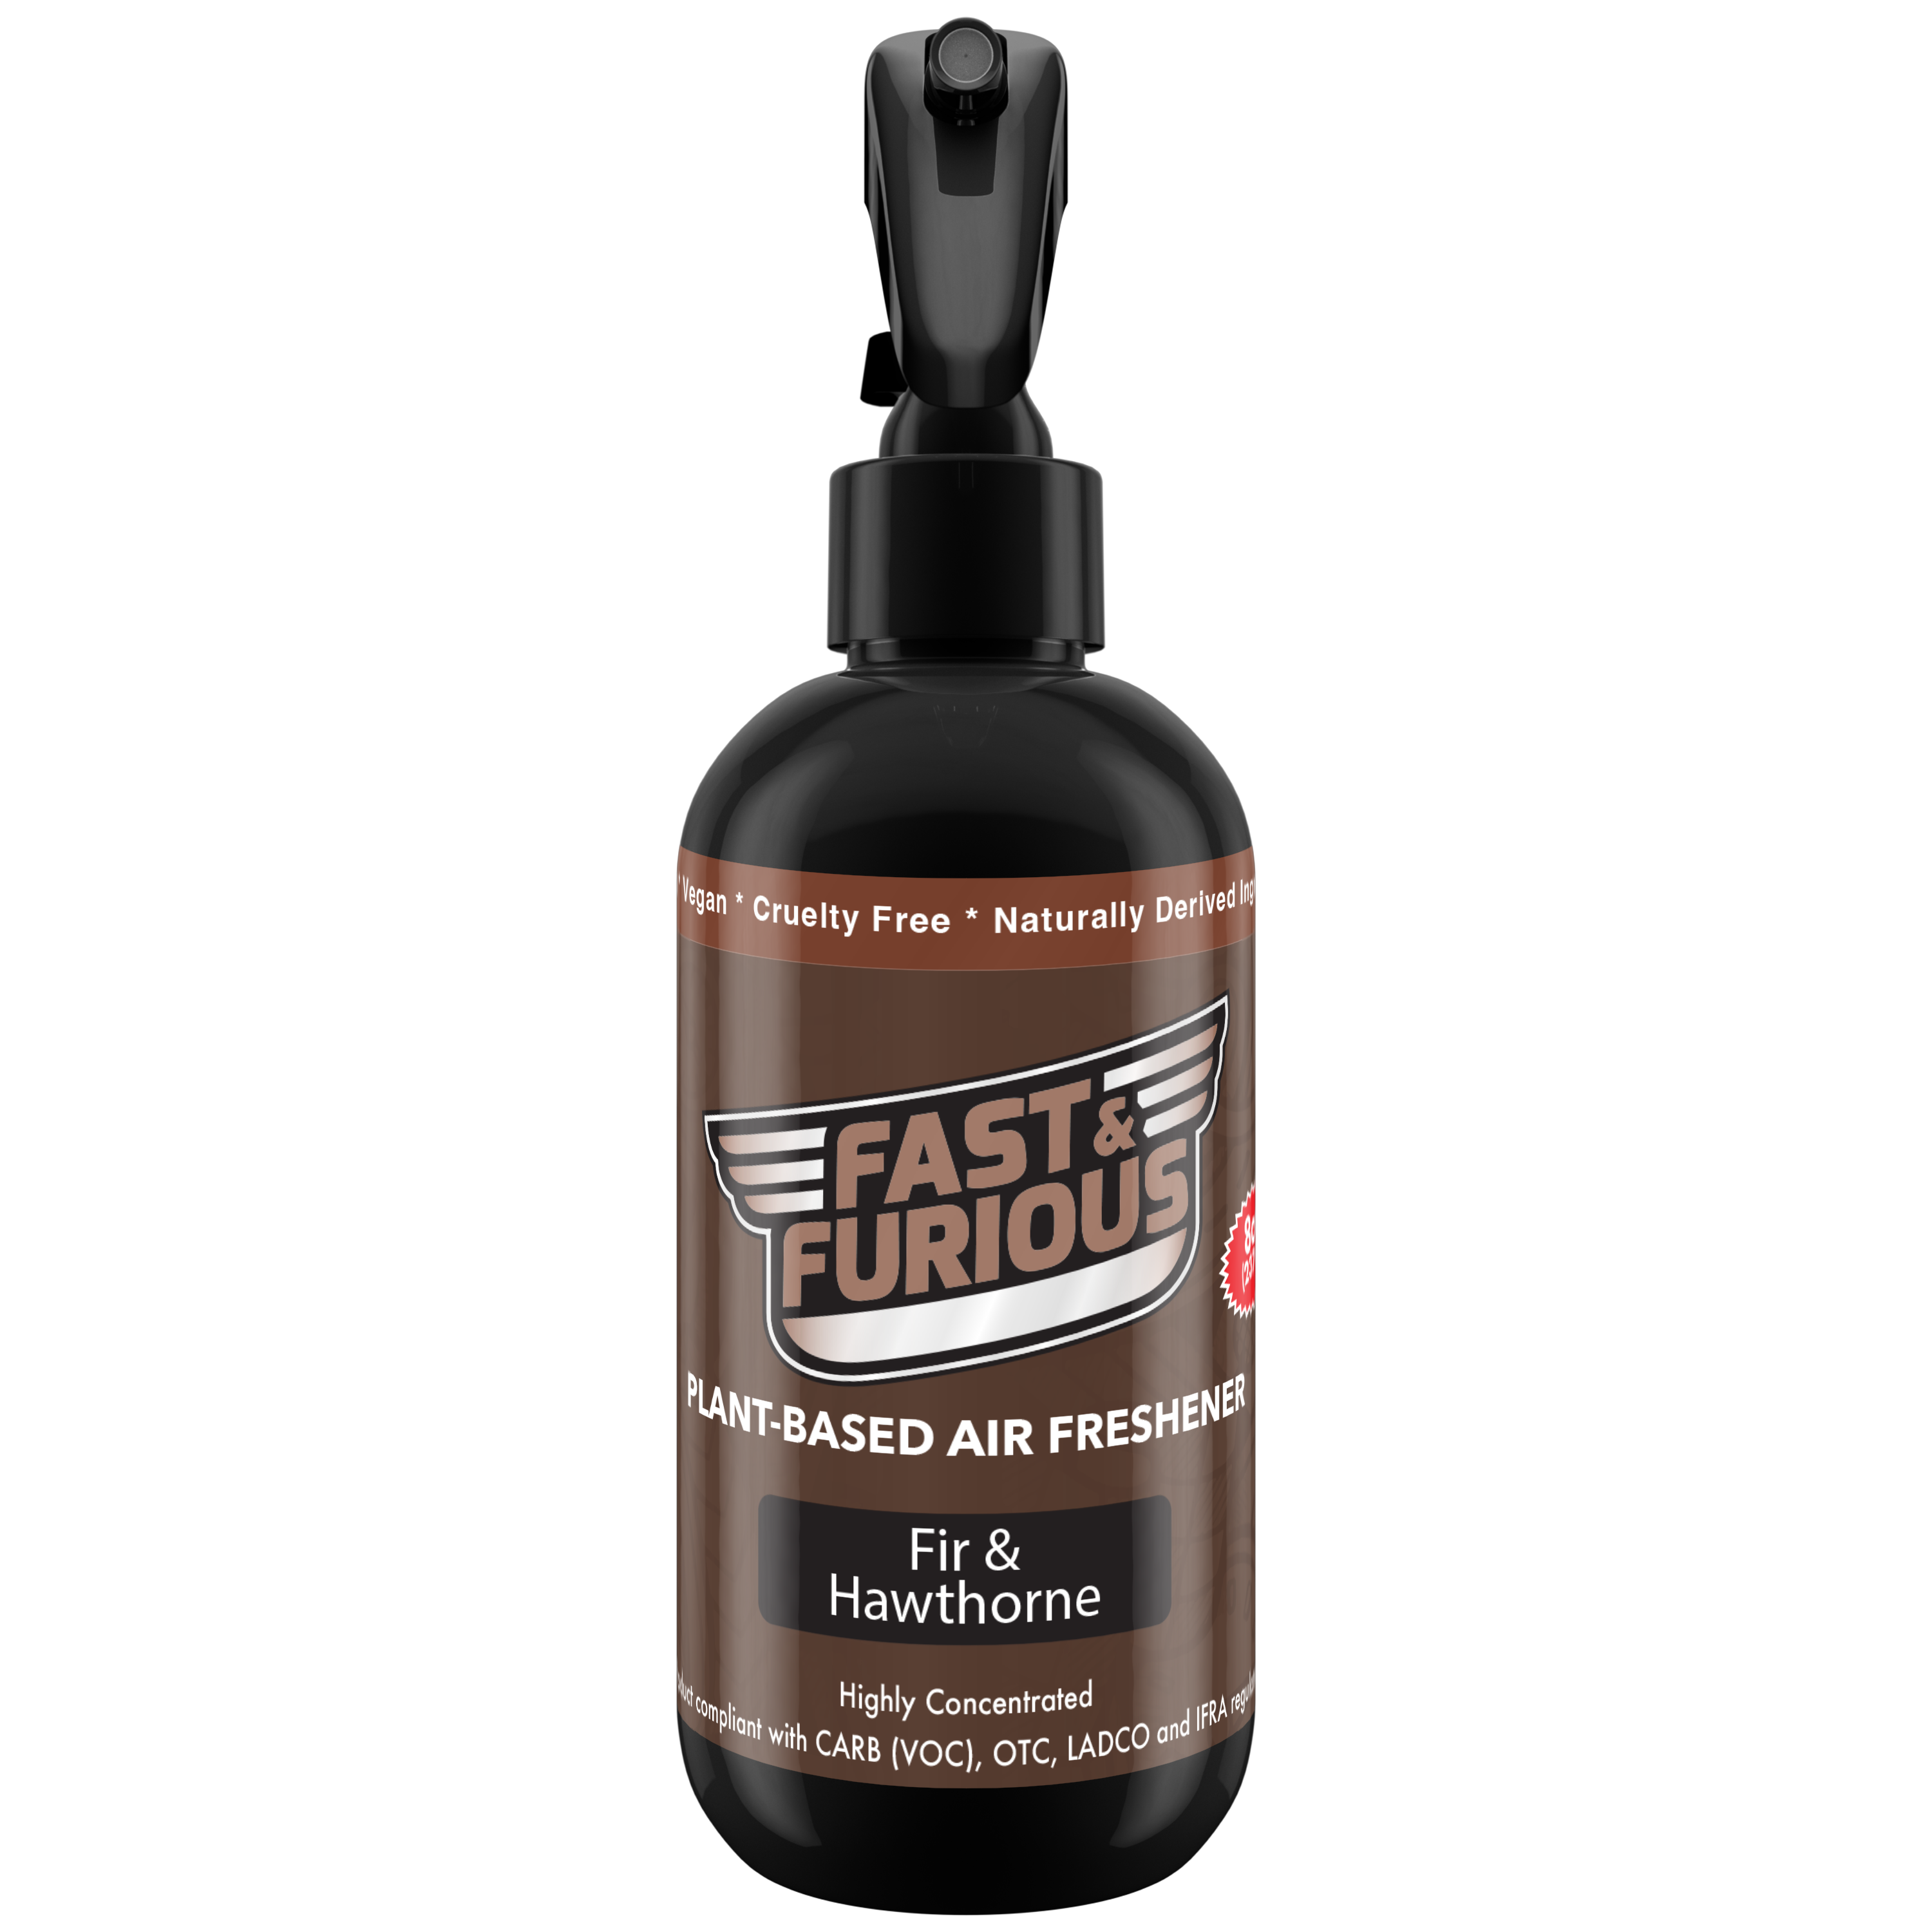 Fast and Furious Plant-Based Air Freshener - Fir & Hawthorne Scent Size: 8oz